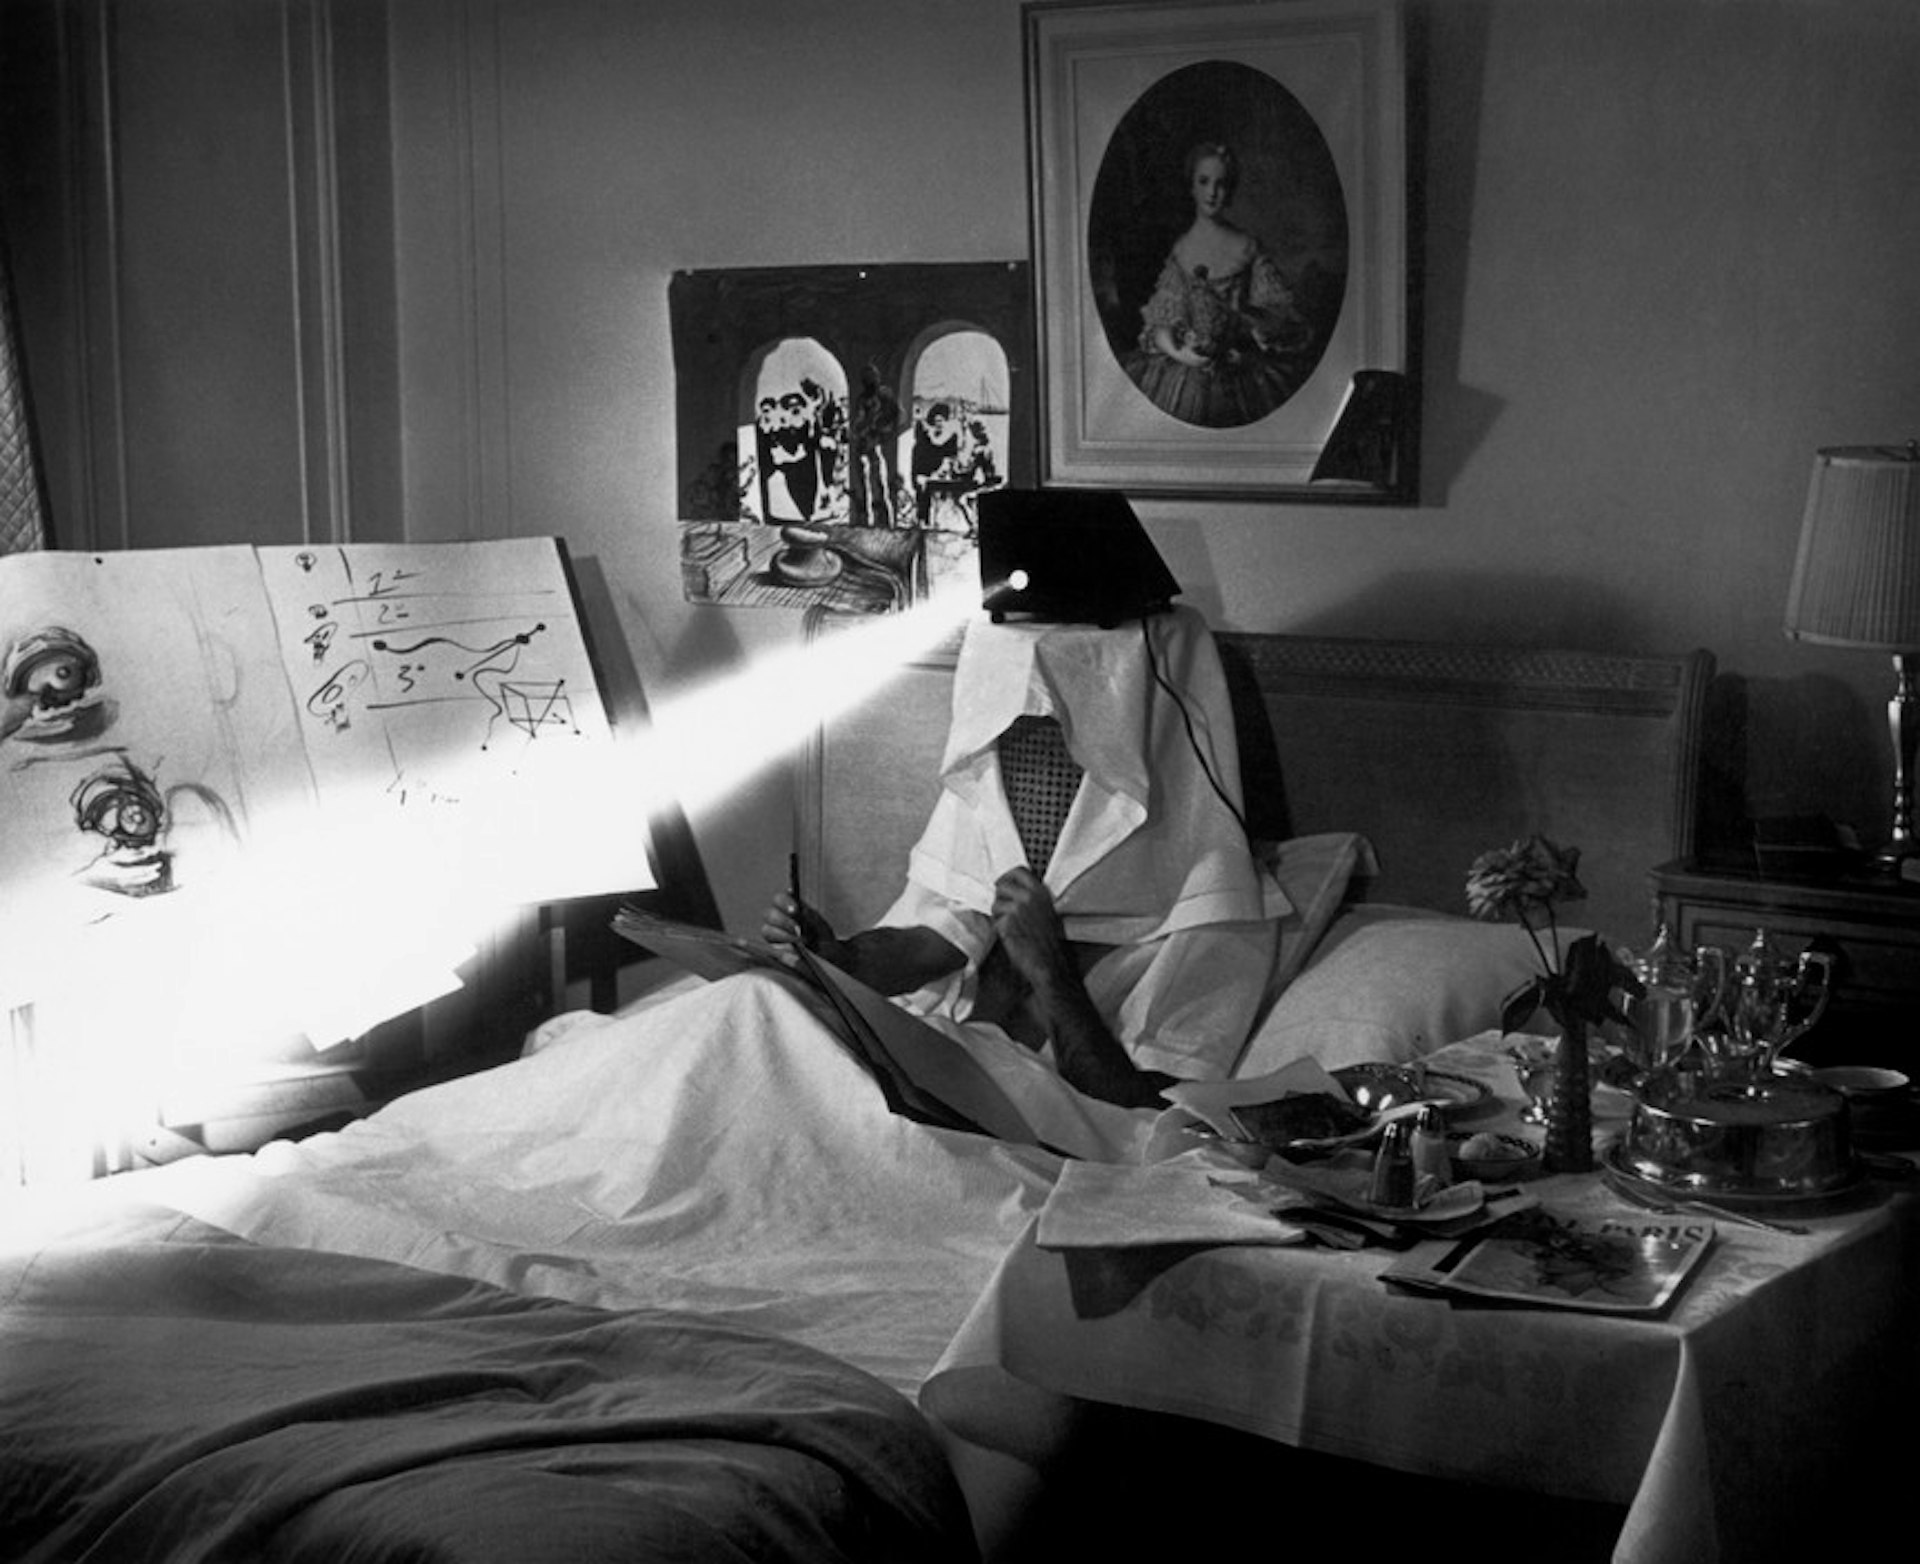 DALI in bed, projecting pieces of dirty paper "to stimulate his inspiration".